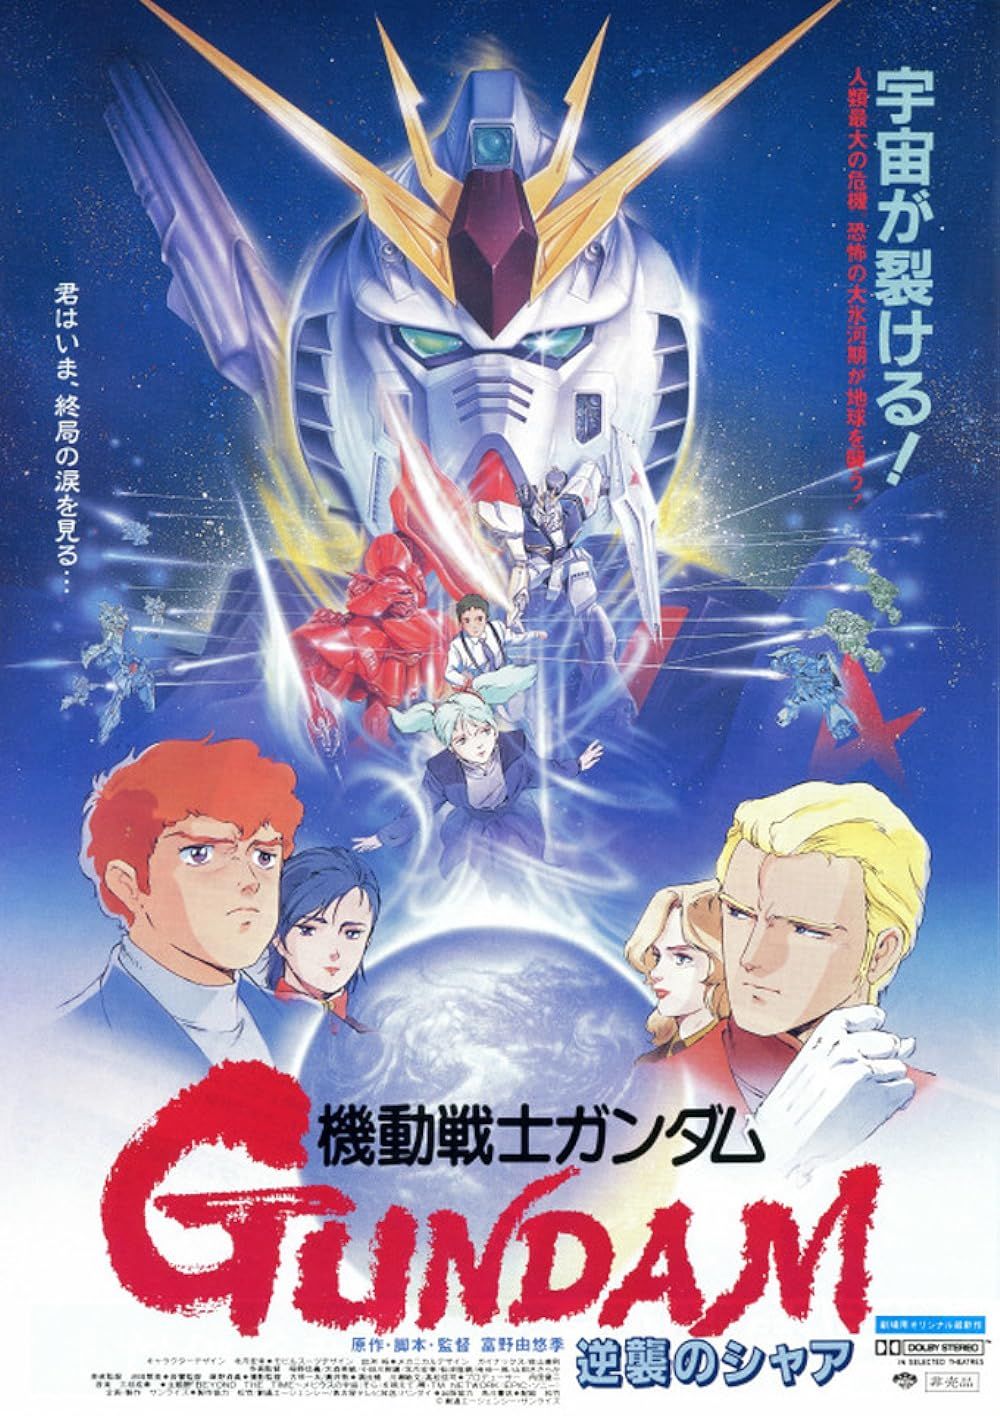 Mobile Suit Gundam: Char's Counterattack anime movie poster